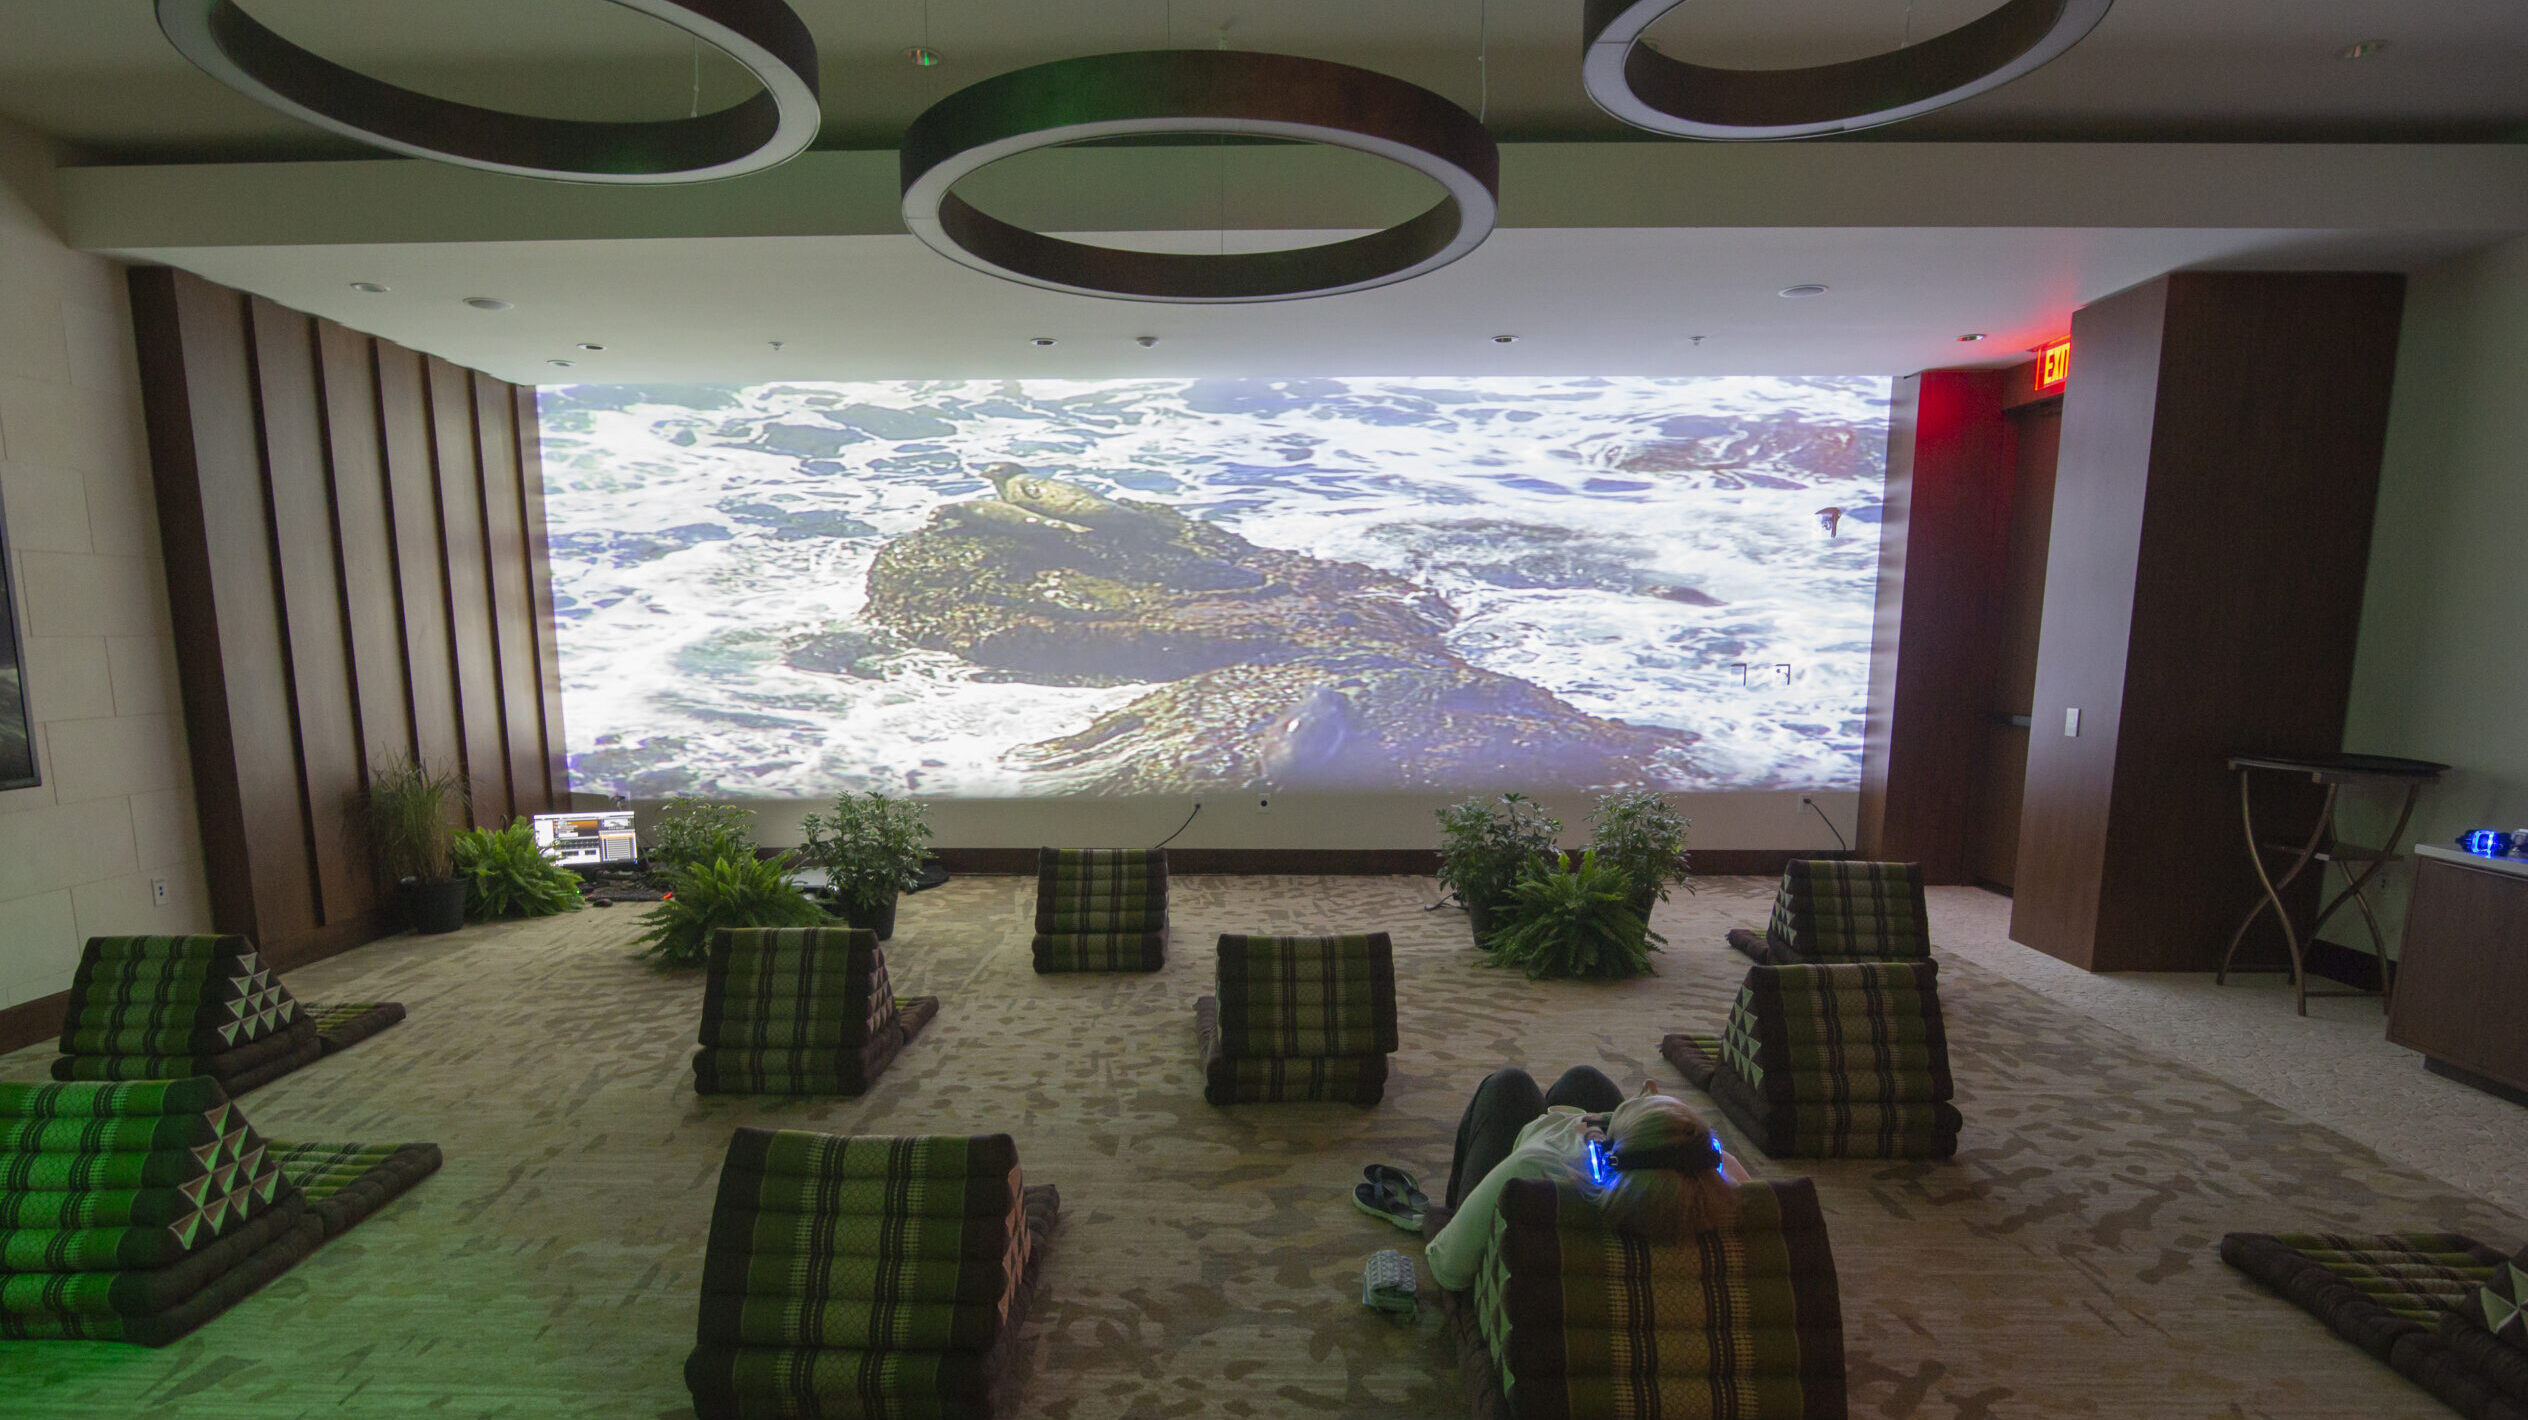 A Zen Den at JW Marriott Marco Island Beach Resort for mental wellness. Cushions let guests watch a projector on the wall.